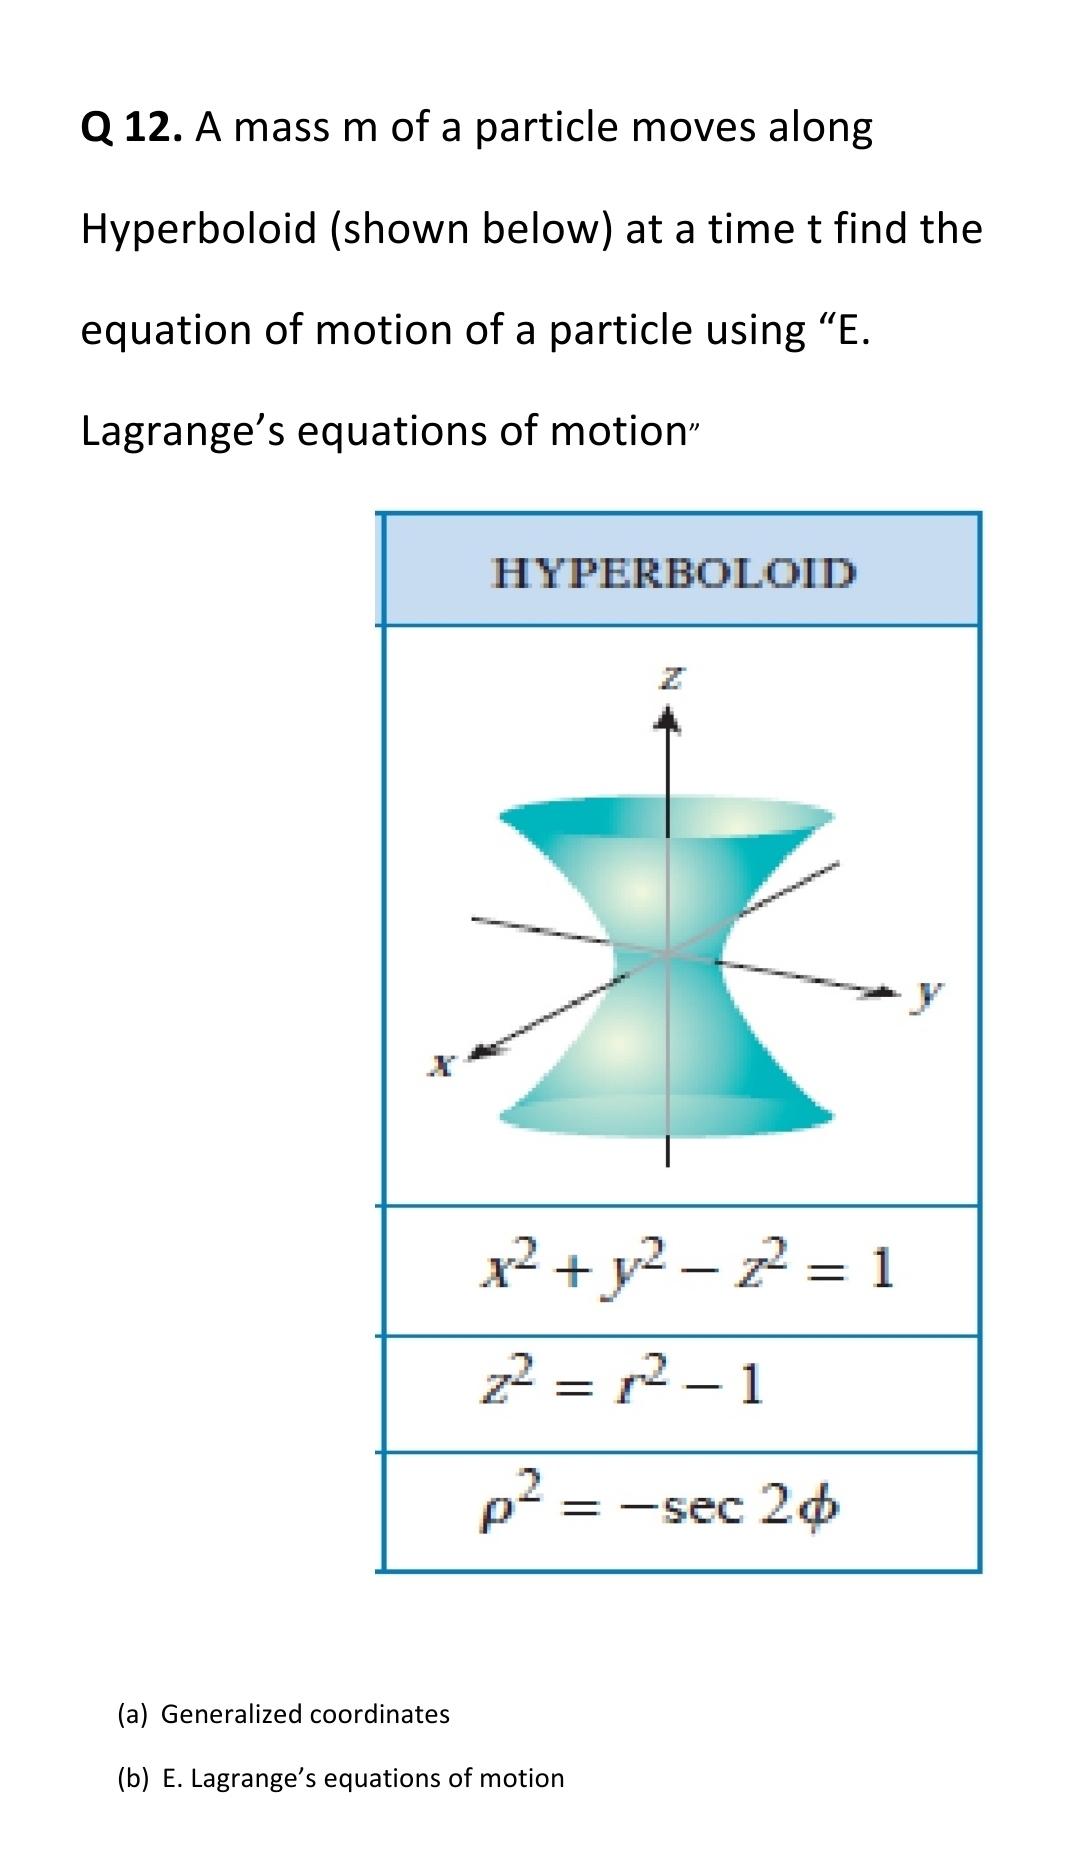 Q 12. A mass m of a particle moves along Hyperboloid (shown below) at a time t find the equation of motion of